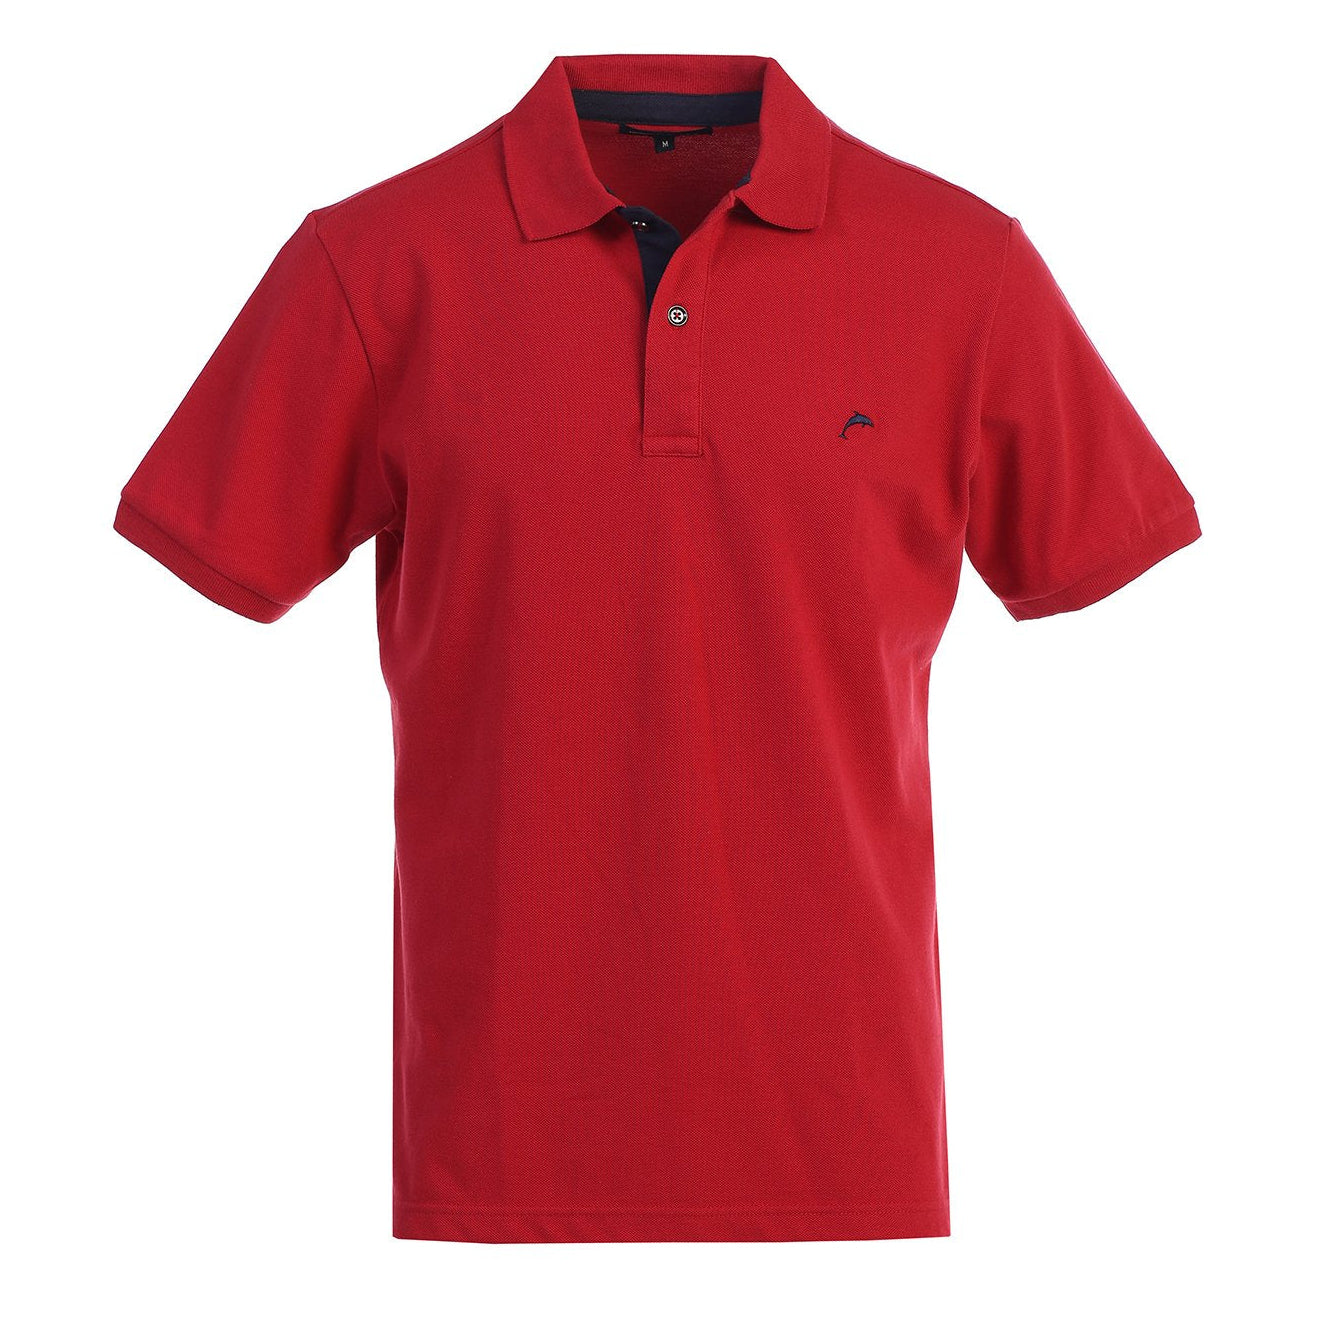 Short Sleeve Polo Shirt in Red MEN